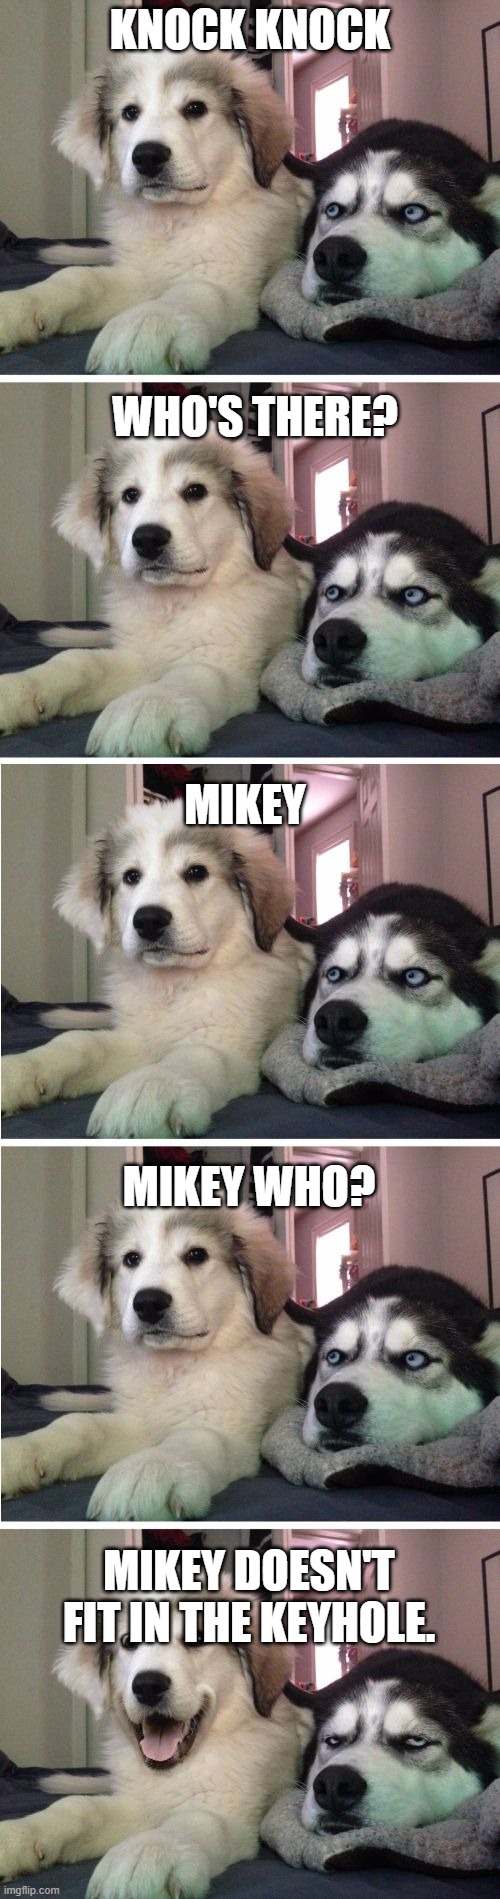 BAD DAD JOKE | KNOCK KNOCK; WHO'S THERE? MIKEY; MIKEY WHO? MIKEY DOESN'T FIT IN THE KEYHOLE. | image tagged in knock knock dogs | made w/ Imgflip meme maker